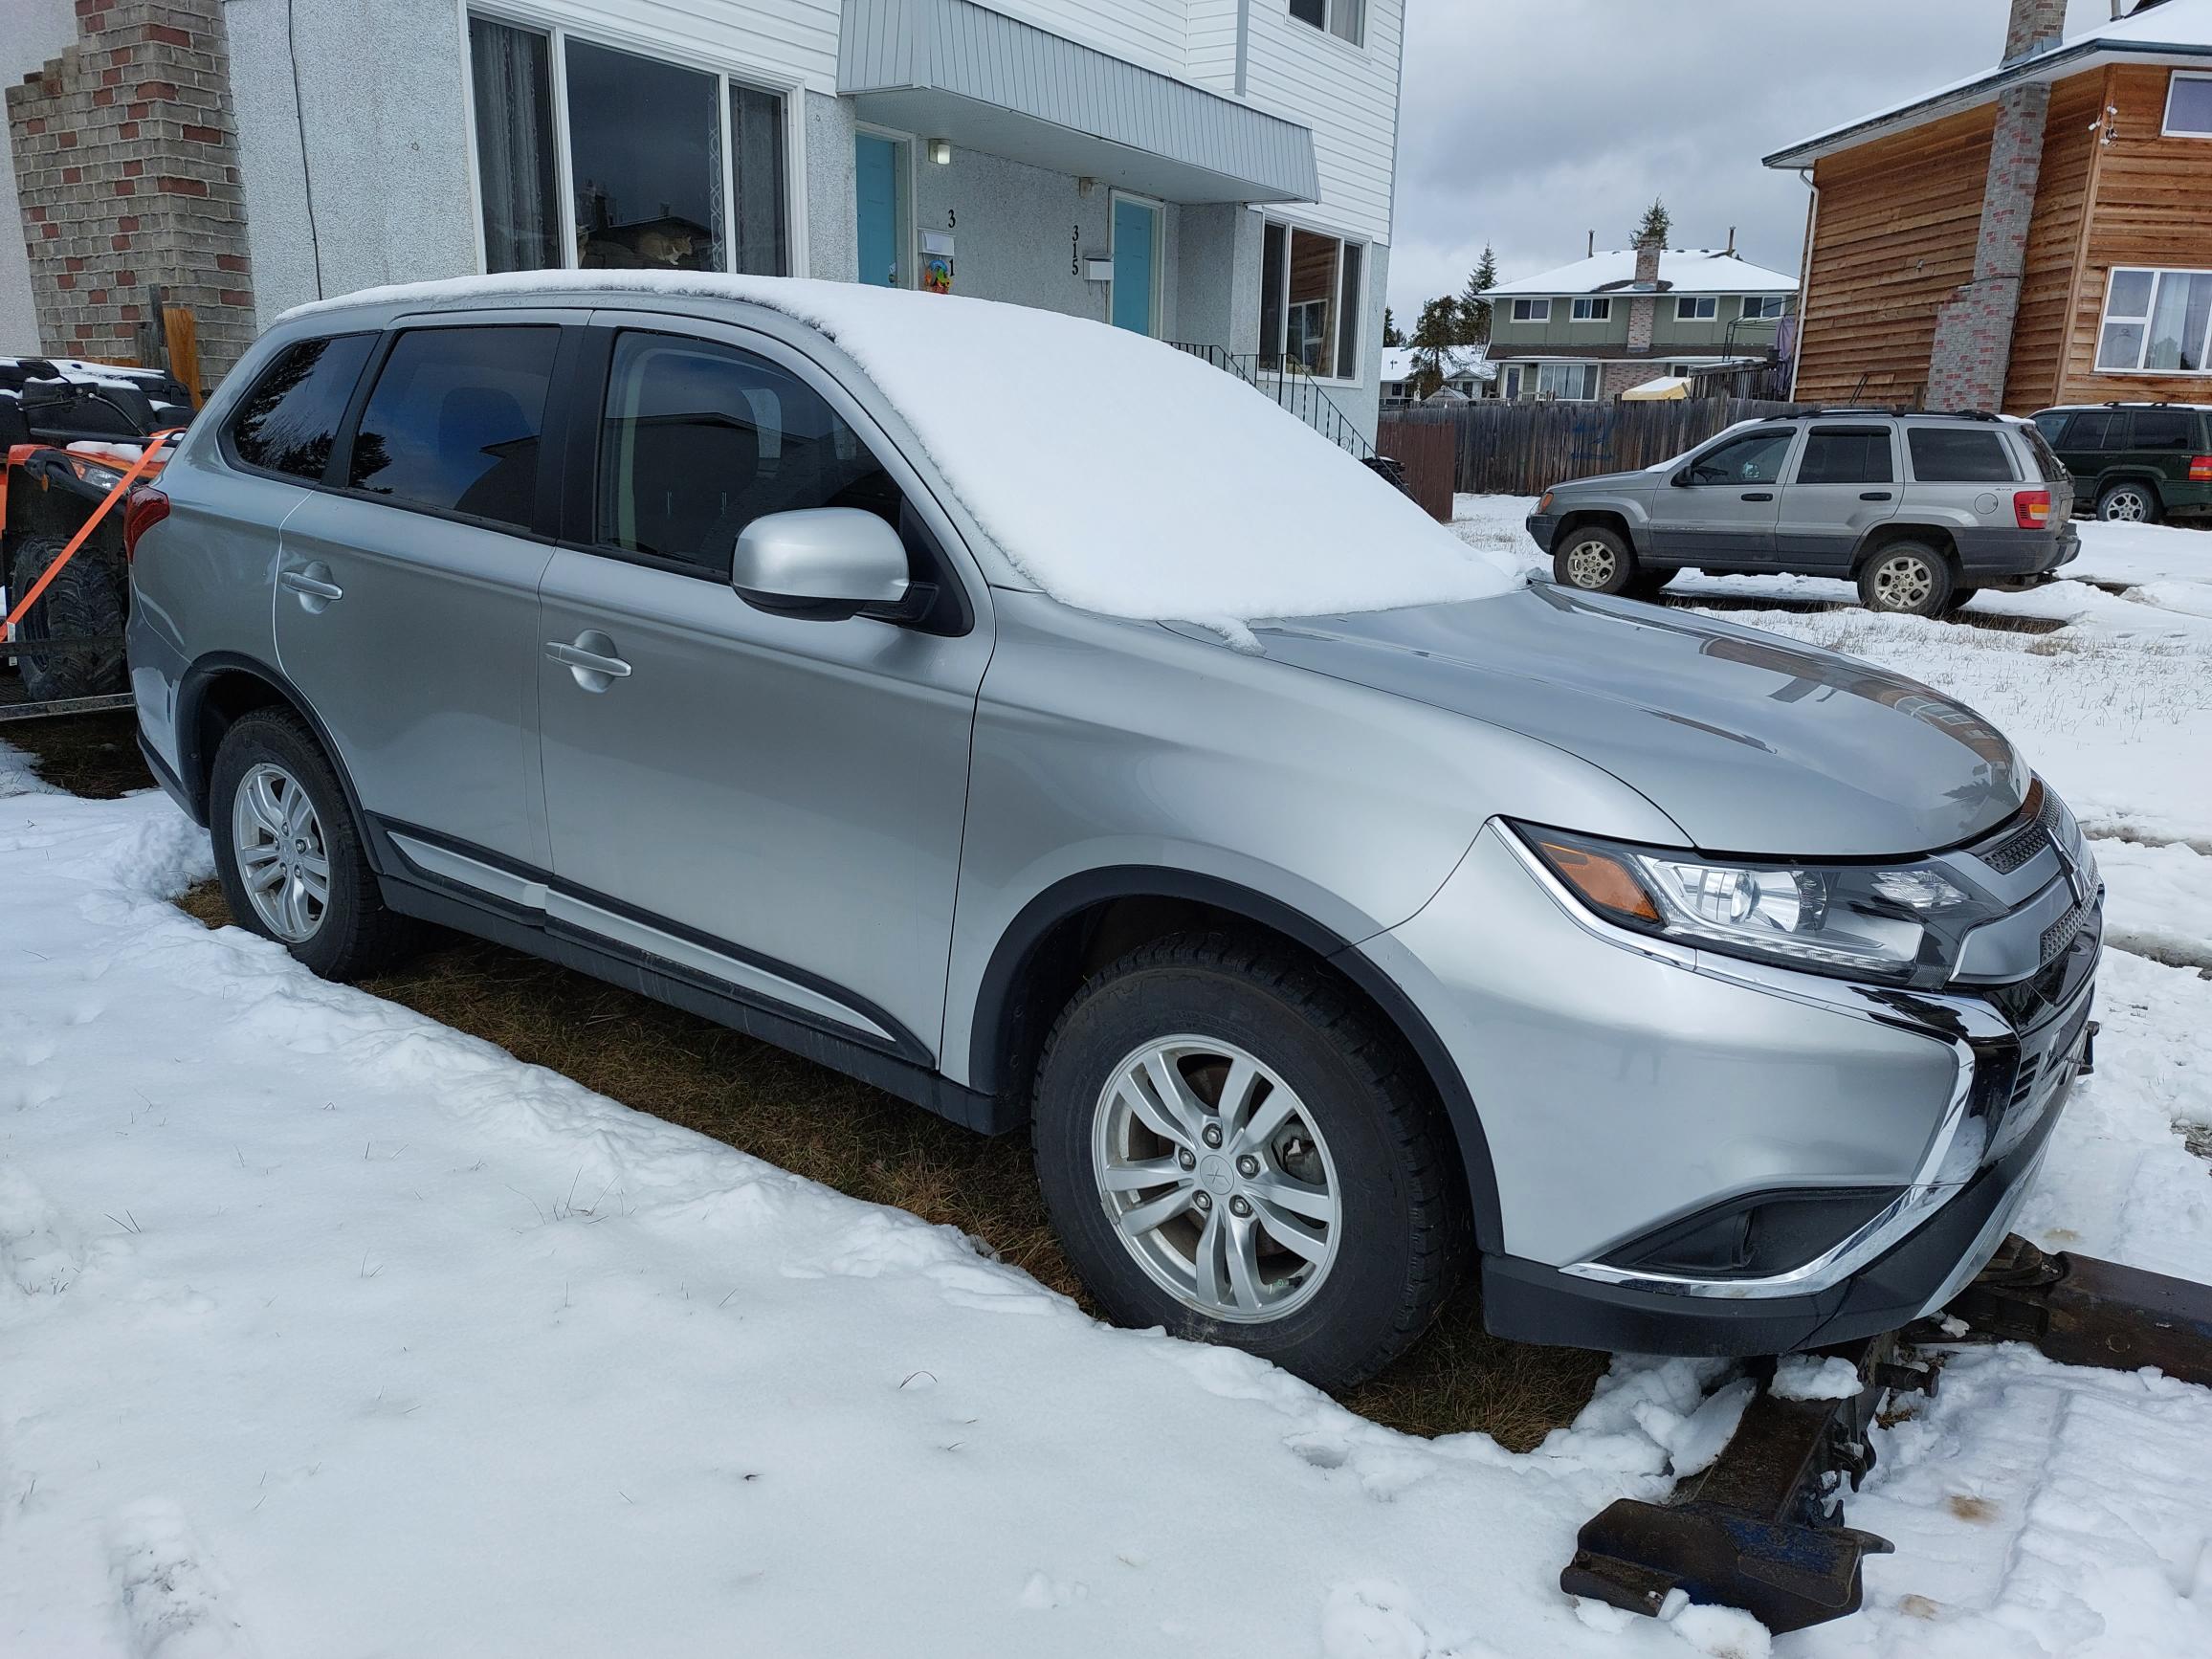 2020 Mitsubishi Outlander #B-PG-0584 Re-Listed Located in Prince George